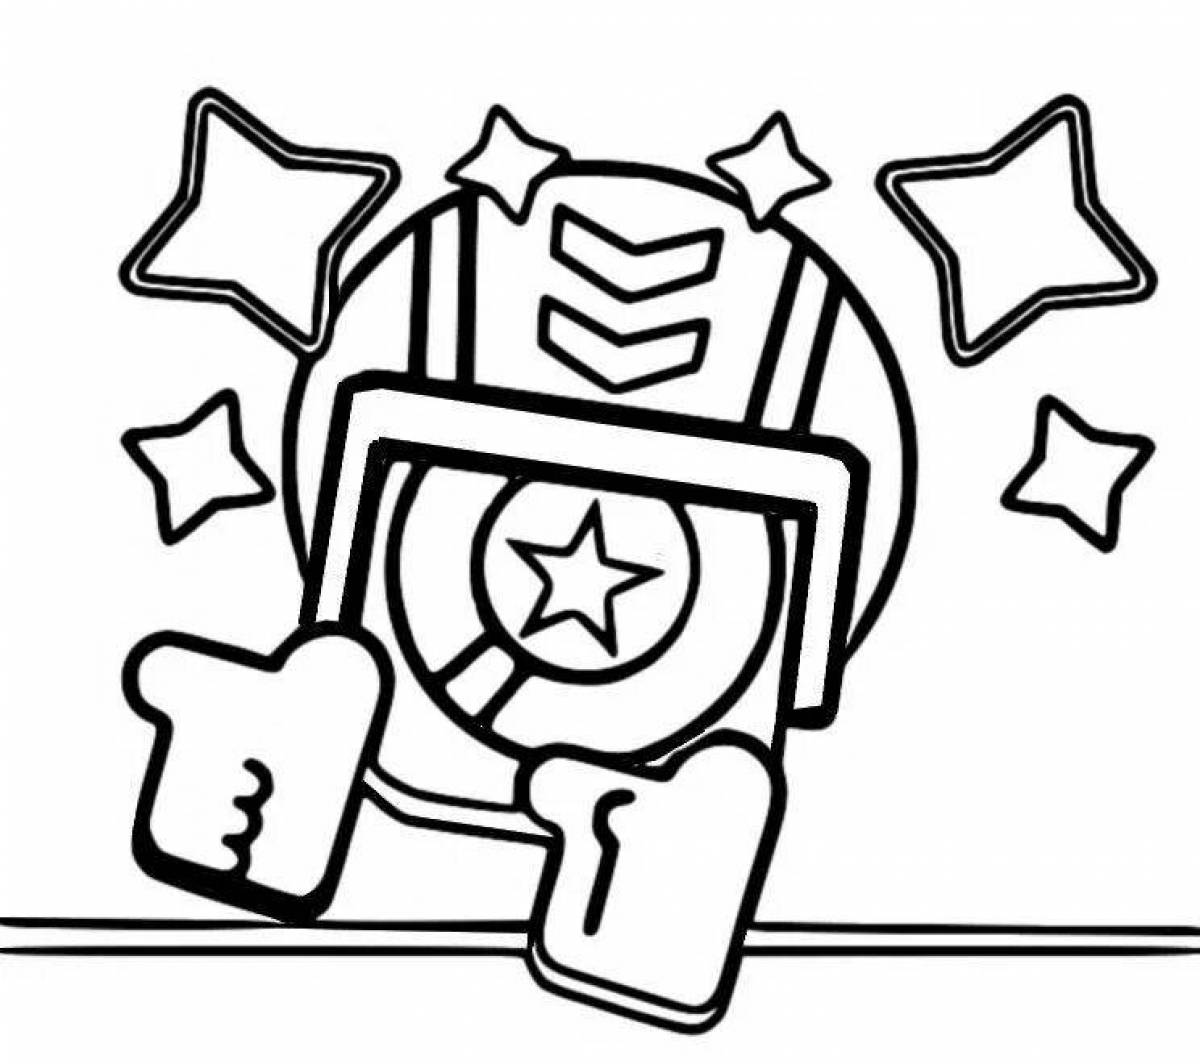 Glowing coloring page icons from brawl stars